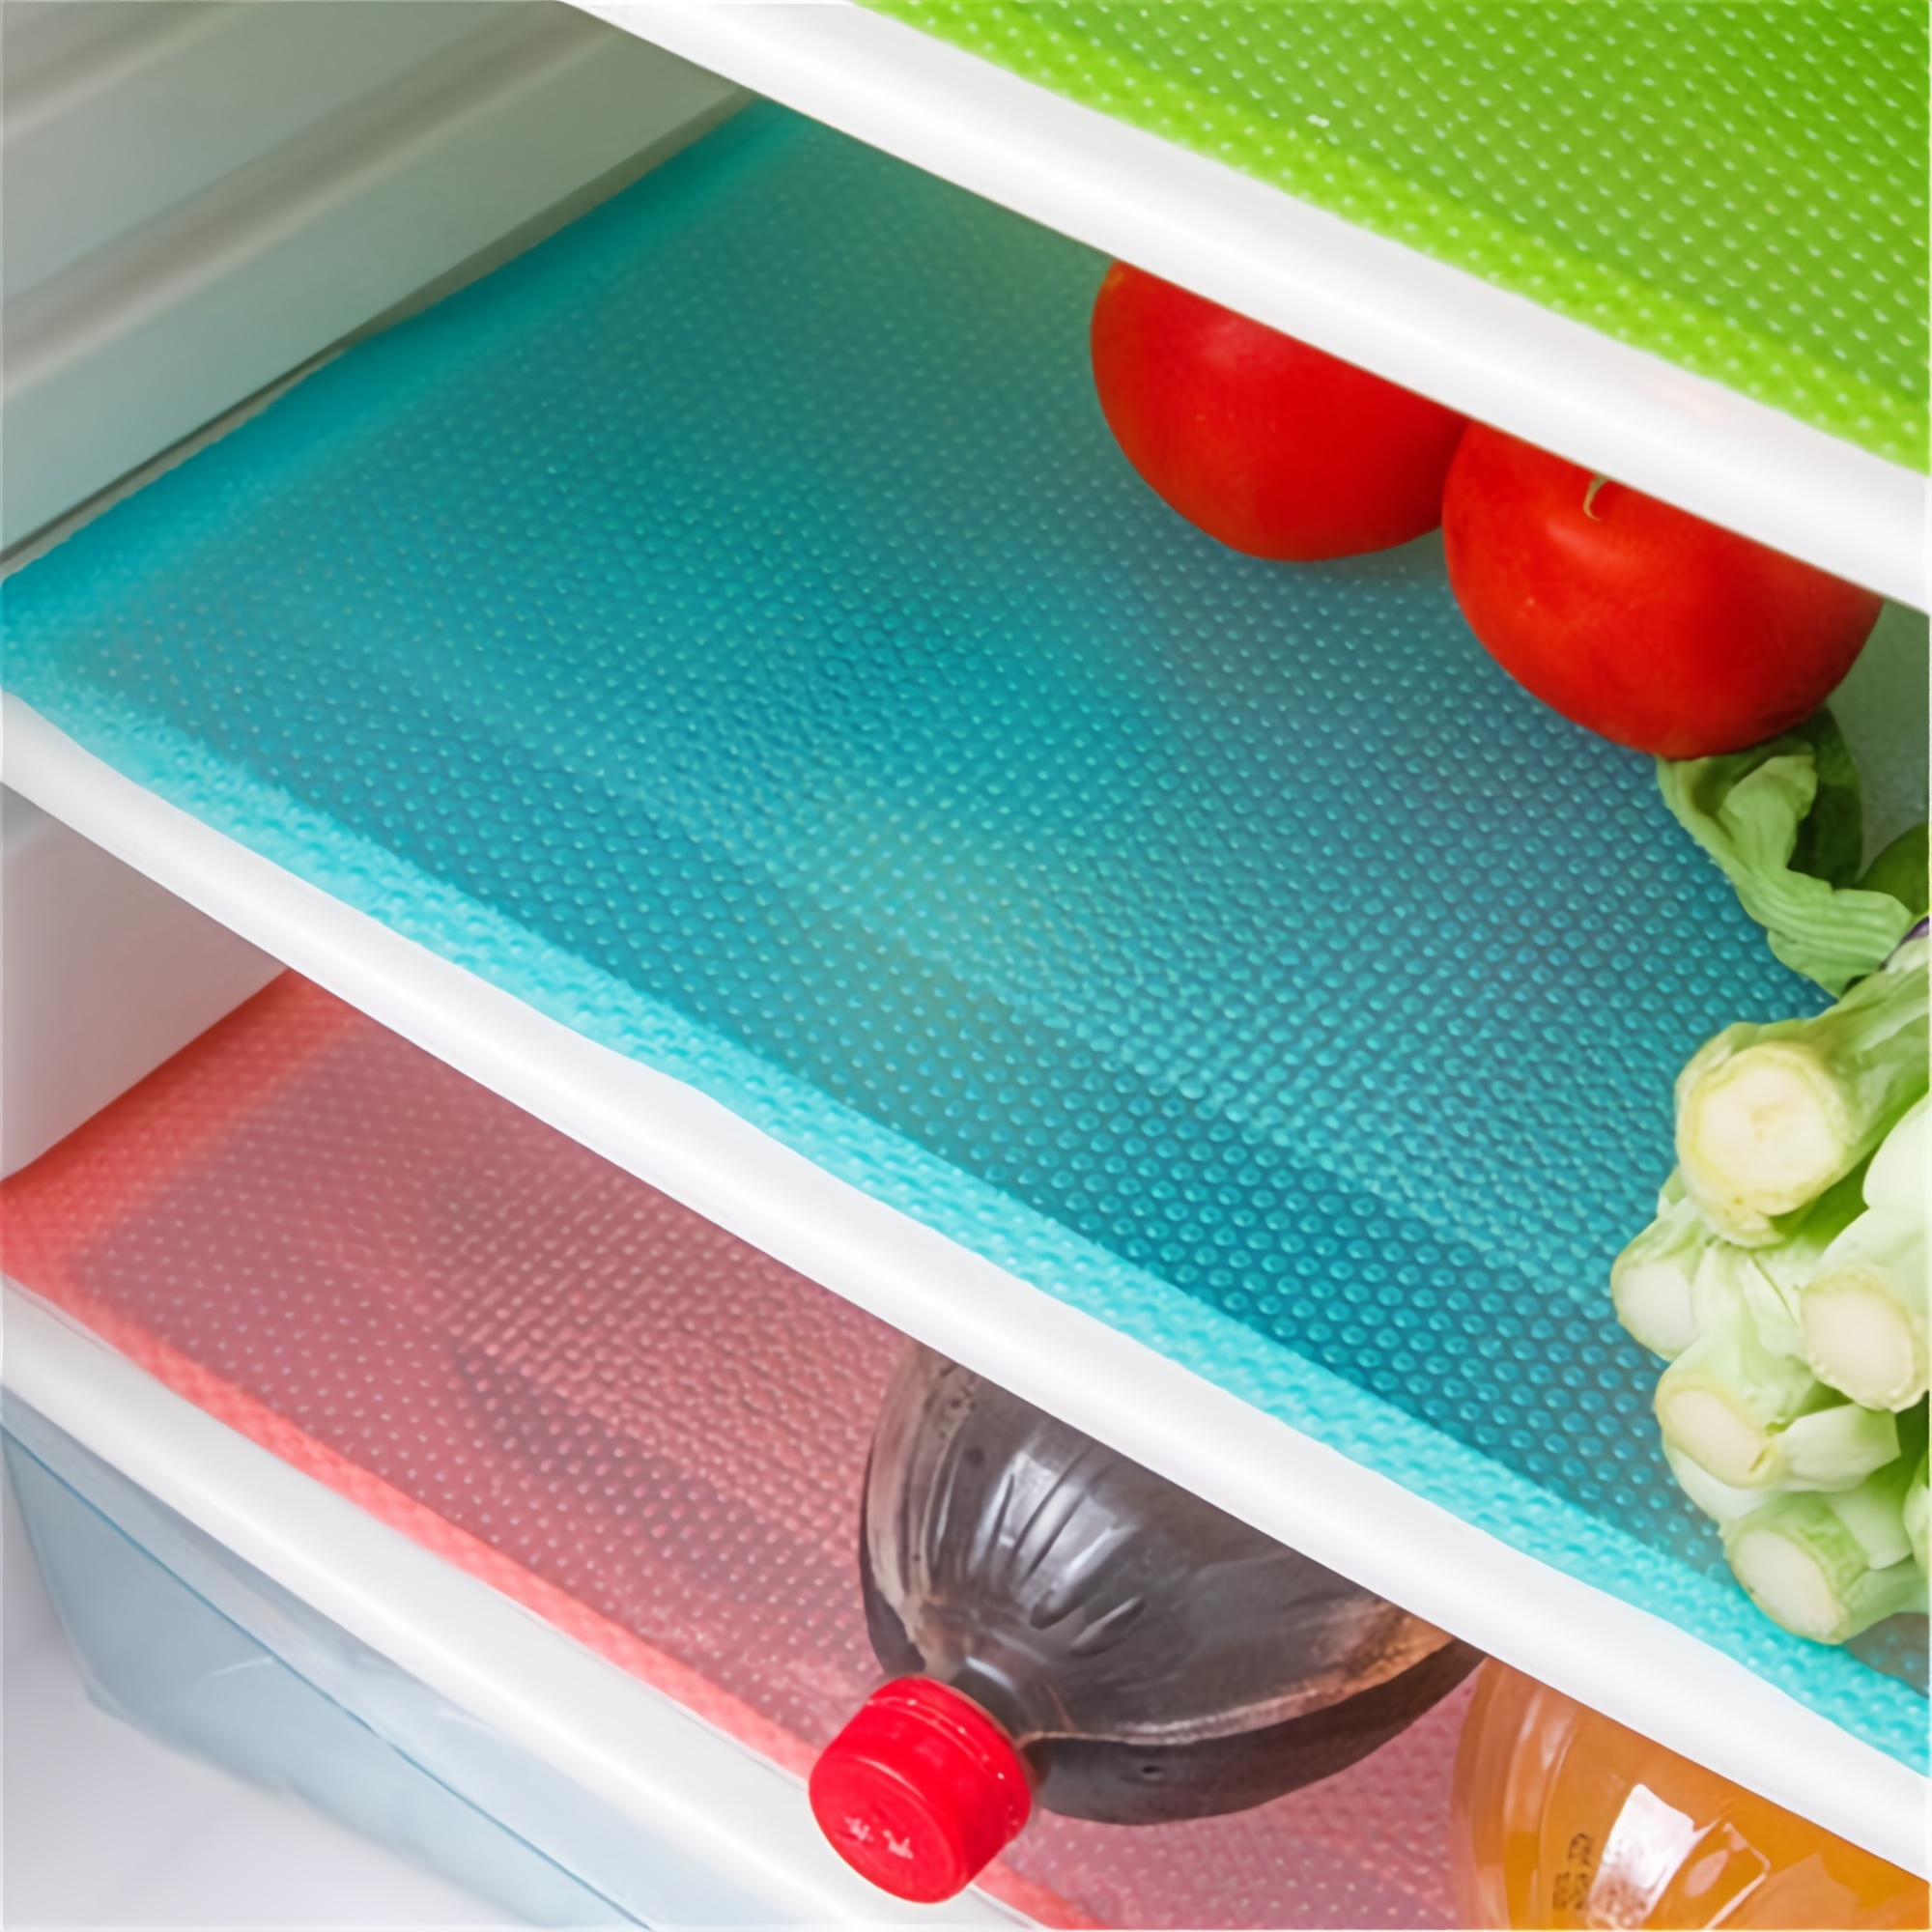 Shelf Liners for Kitchen Cabinets Non Adhesive, Drawer Liner for Bathroom  Non-Slip, Waterproof Refrigerator Liners for Shelves Fridge Mats, Plastic